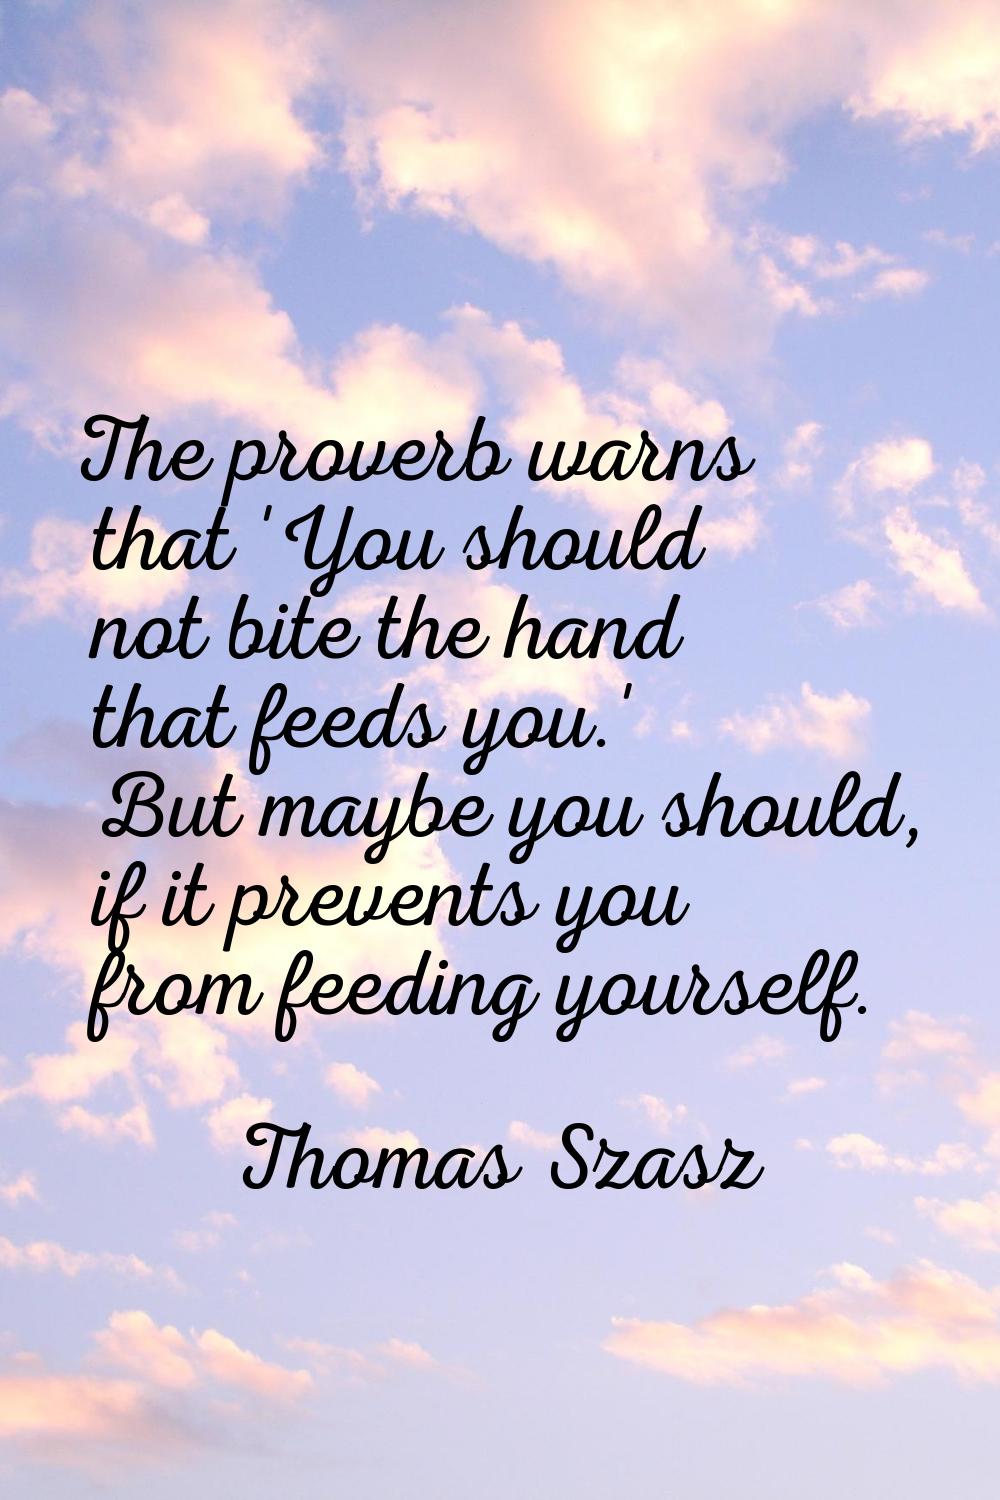 The proverb warns that 'You should not bite the hand that feeds you.' But maybe you should, if it p